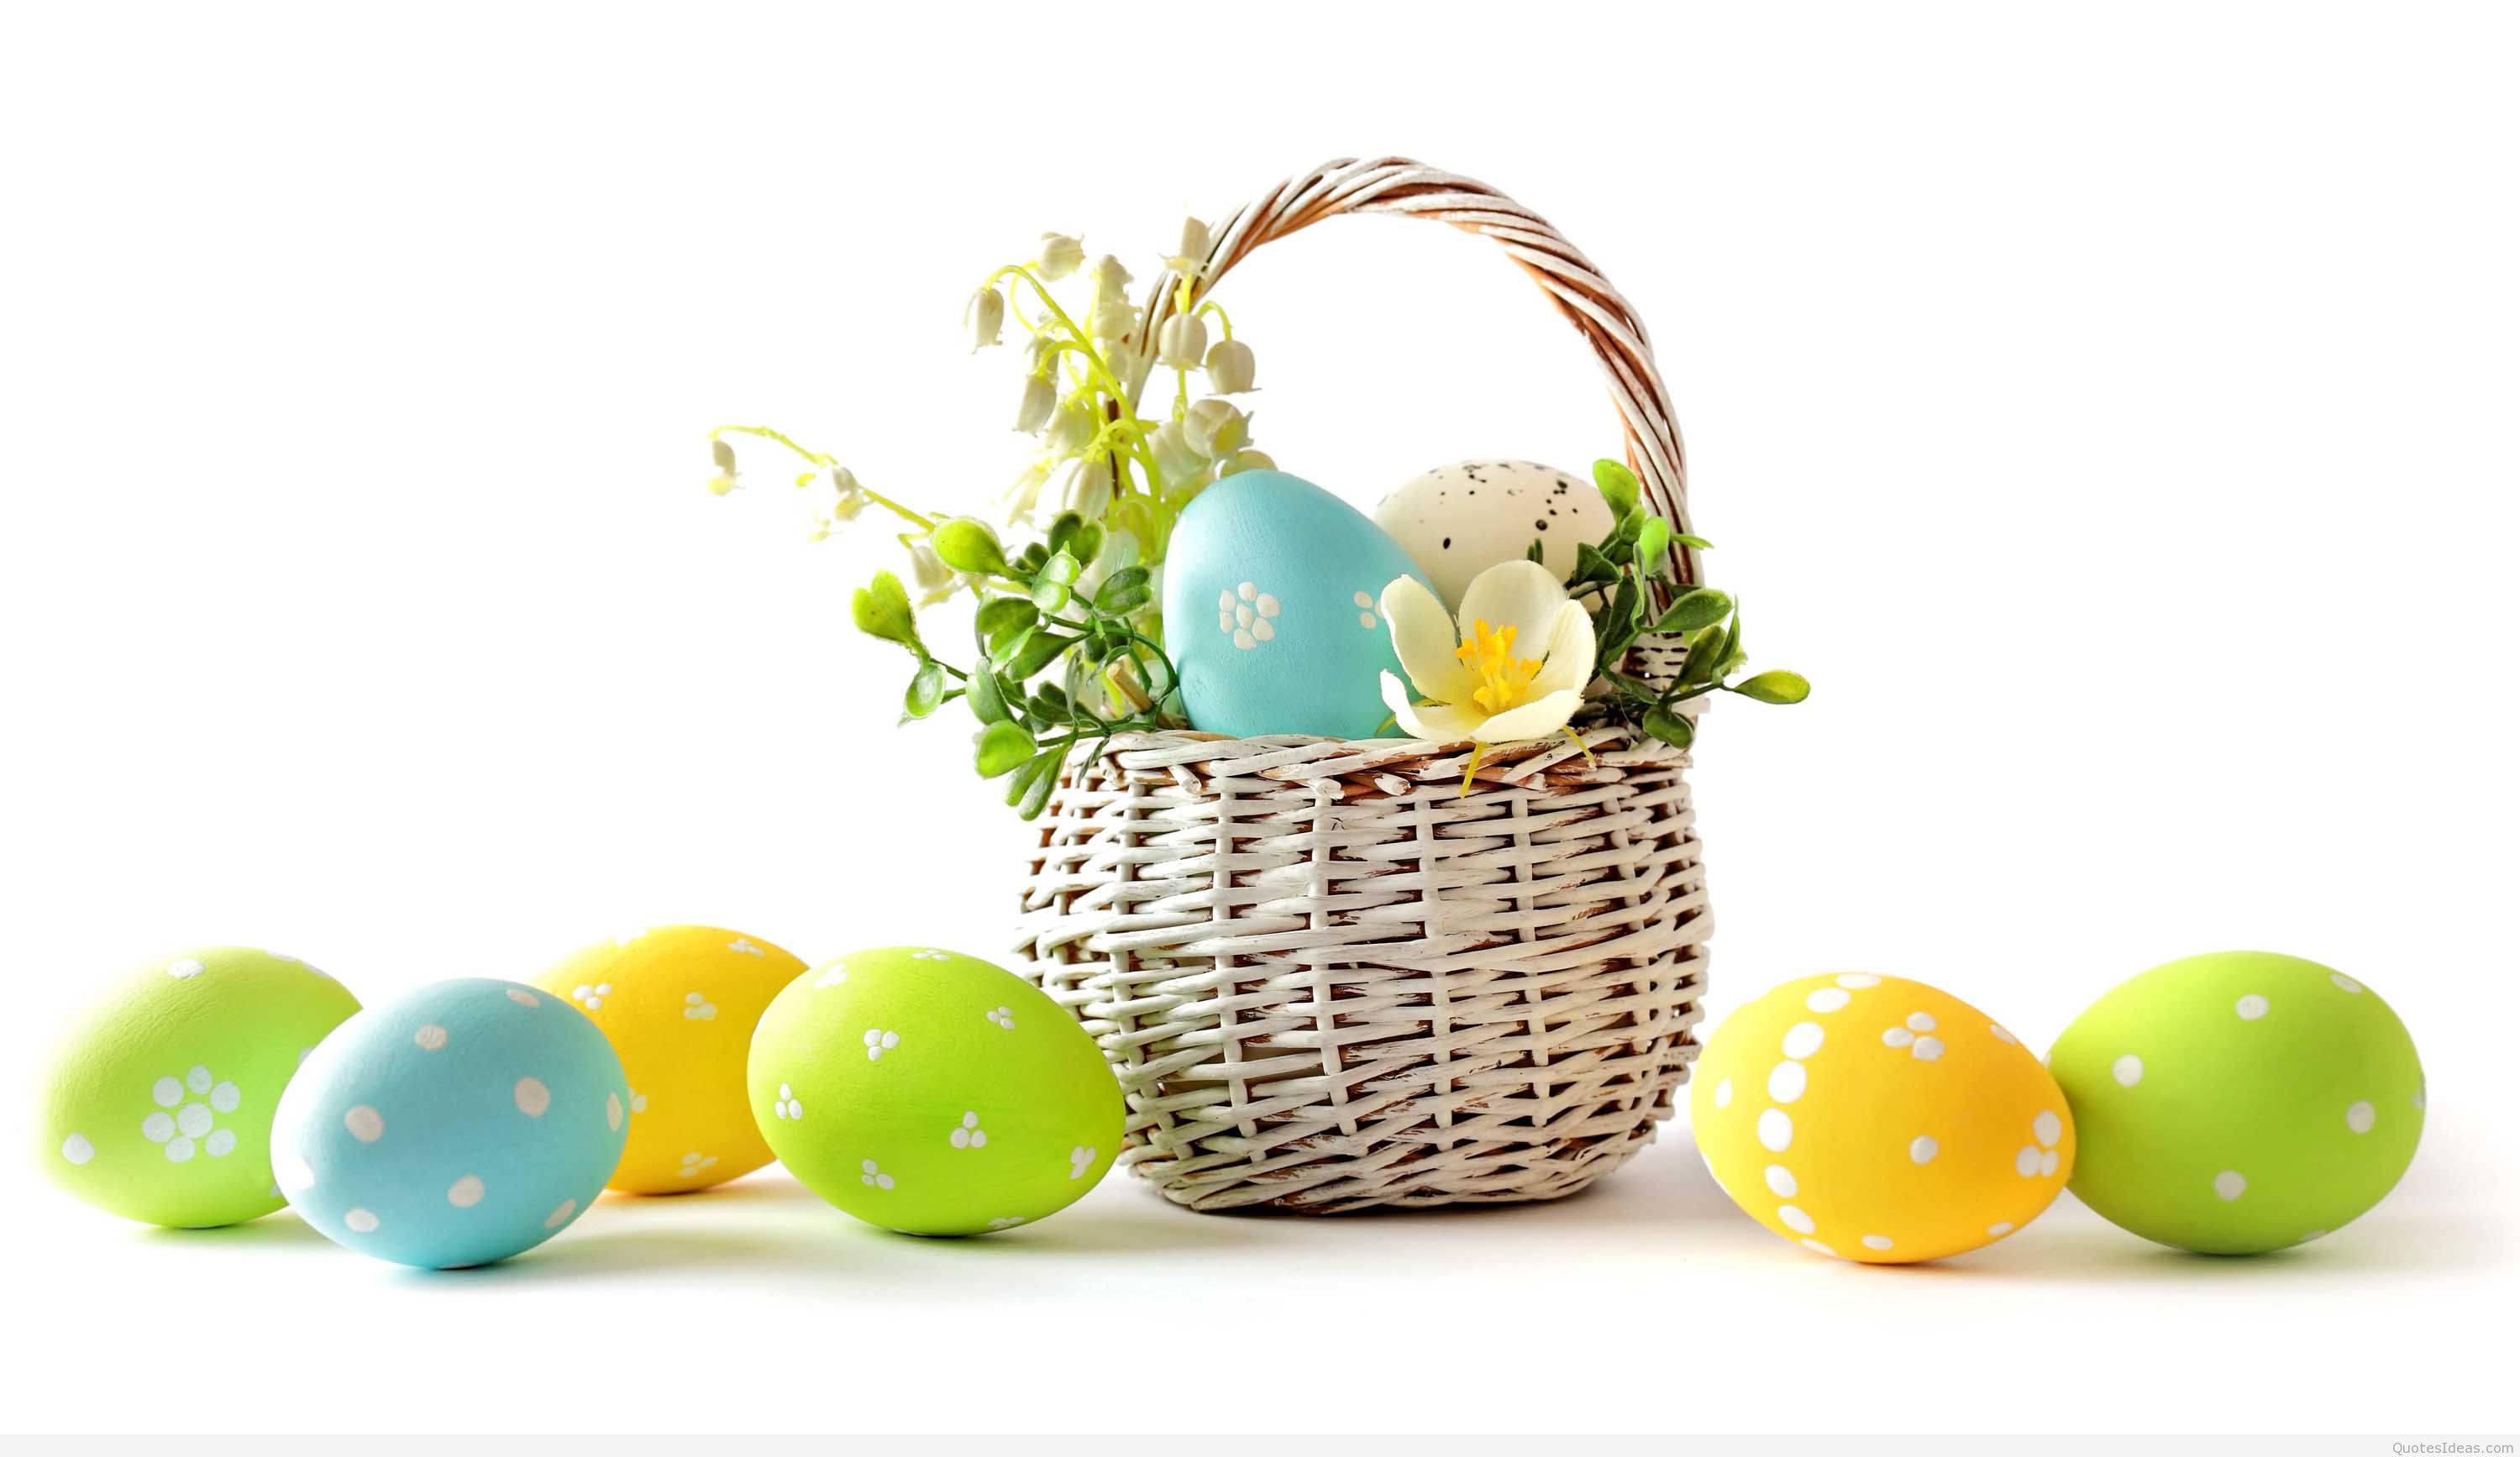 Happy Easter wallpapers and quotes 2015 2016